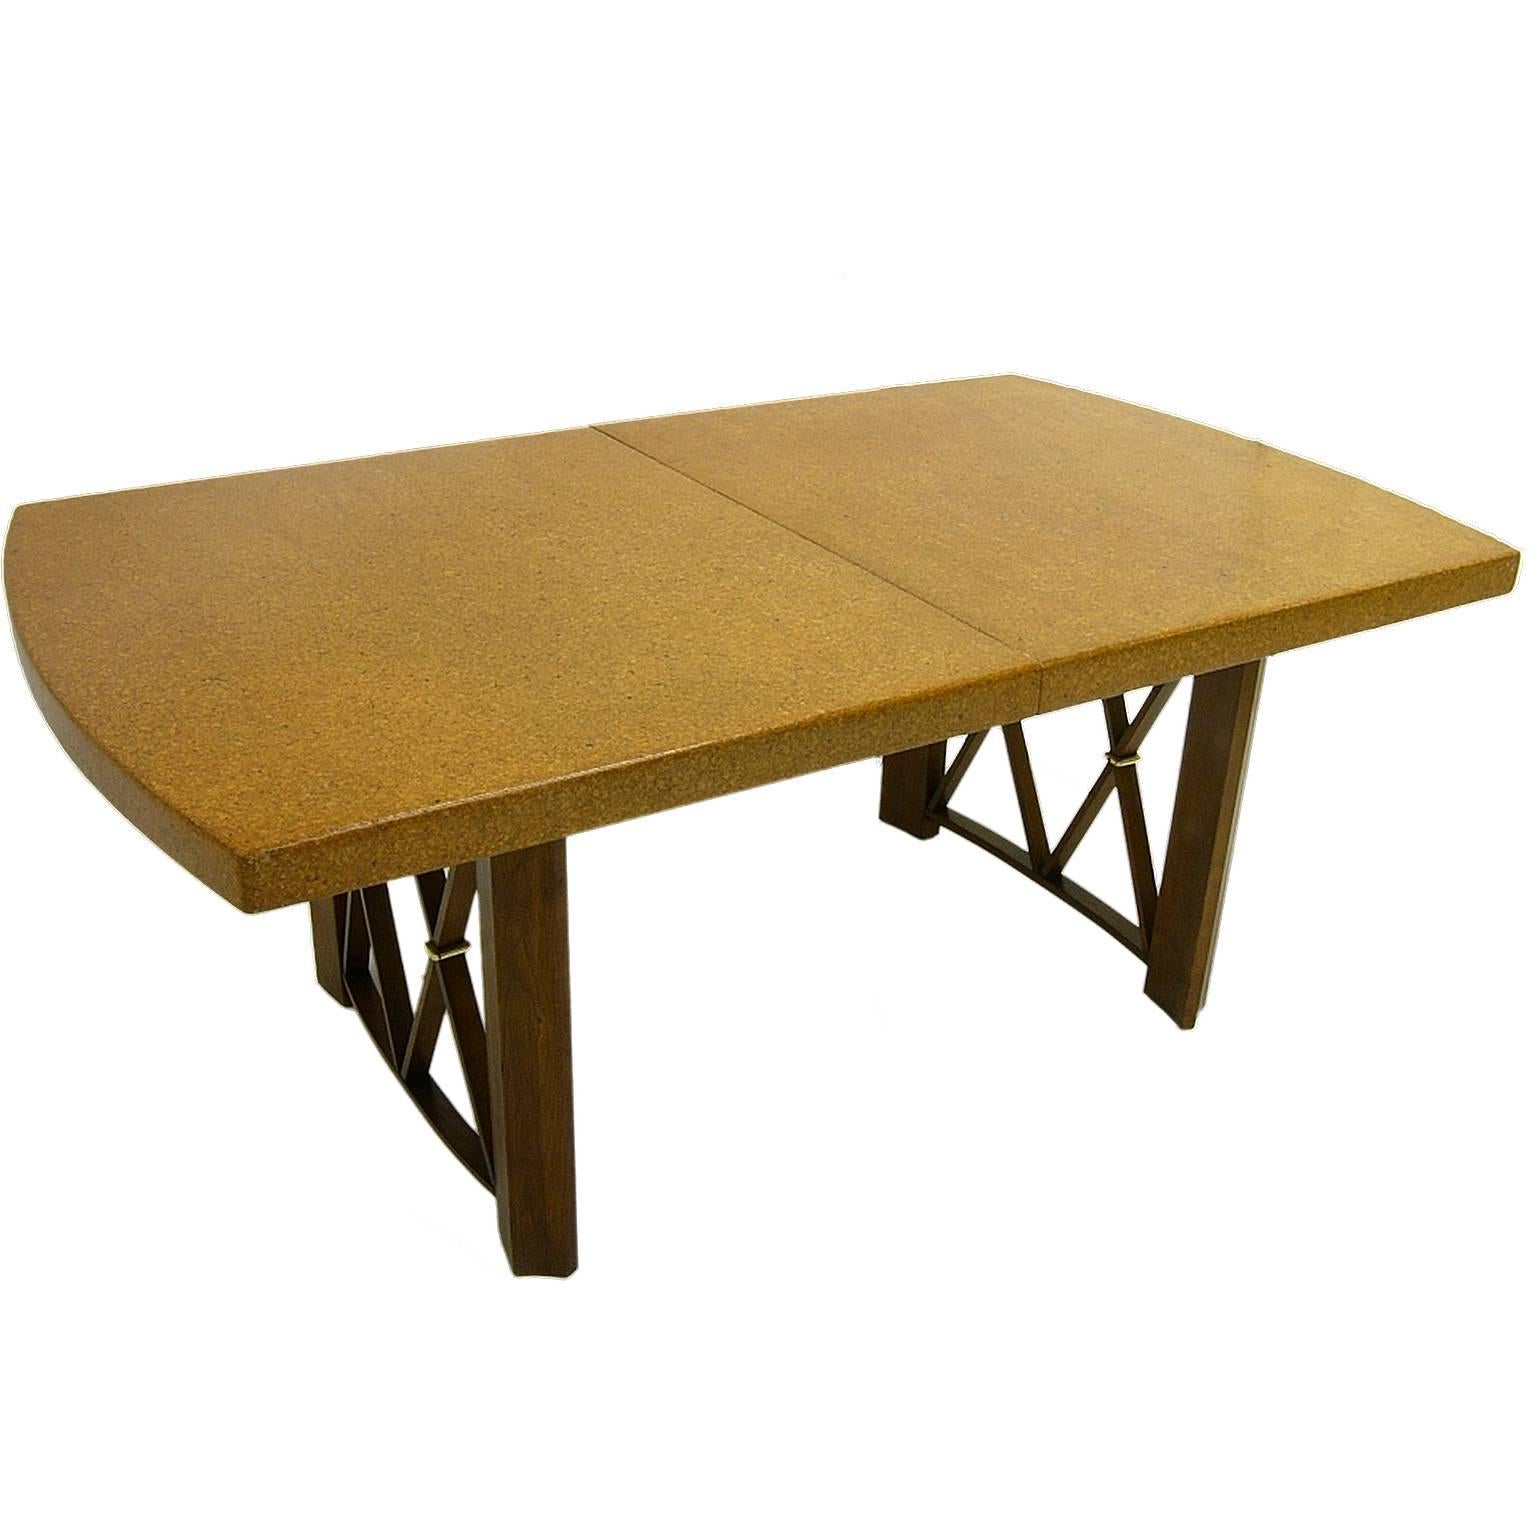 Mid-20th Century Stunning Paul Frankl Cork Top Dining Table by Johnson Furniture Company